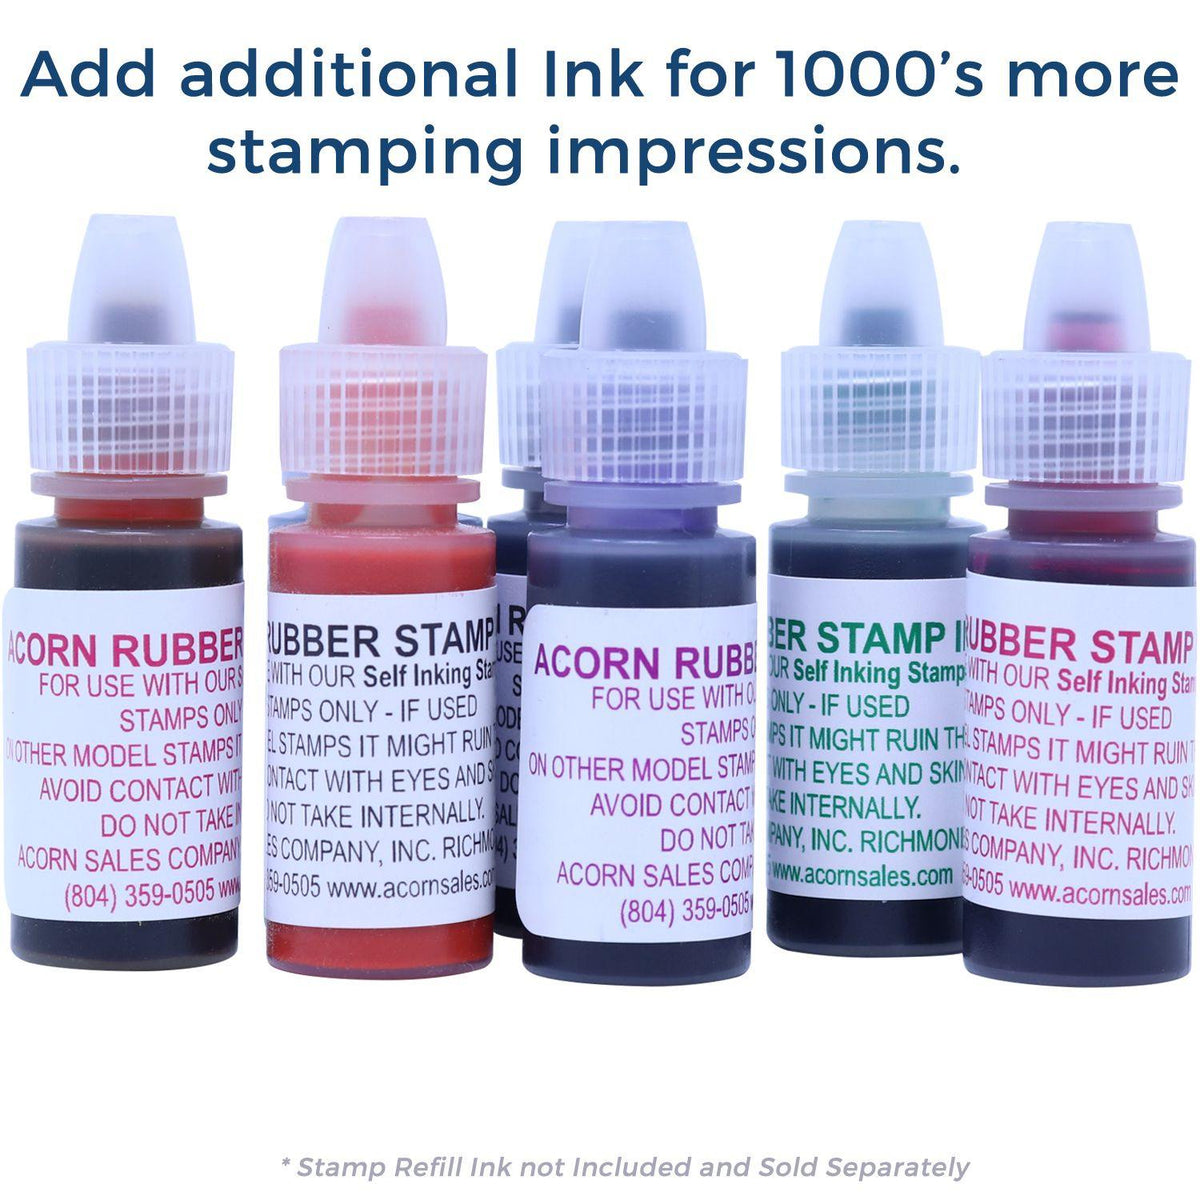 Refill Inks for Large Pre-Inked Formas Stamp Available